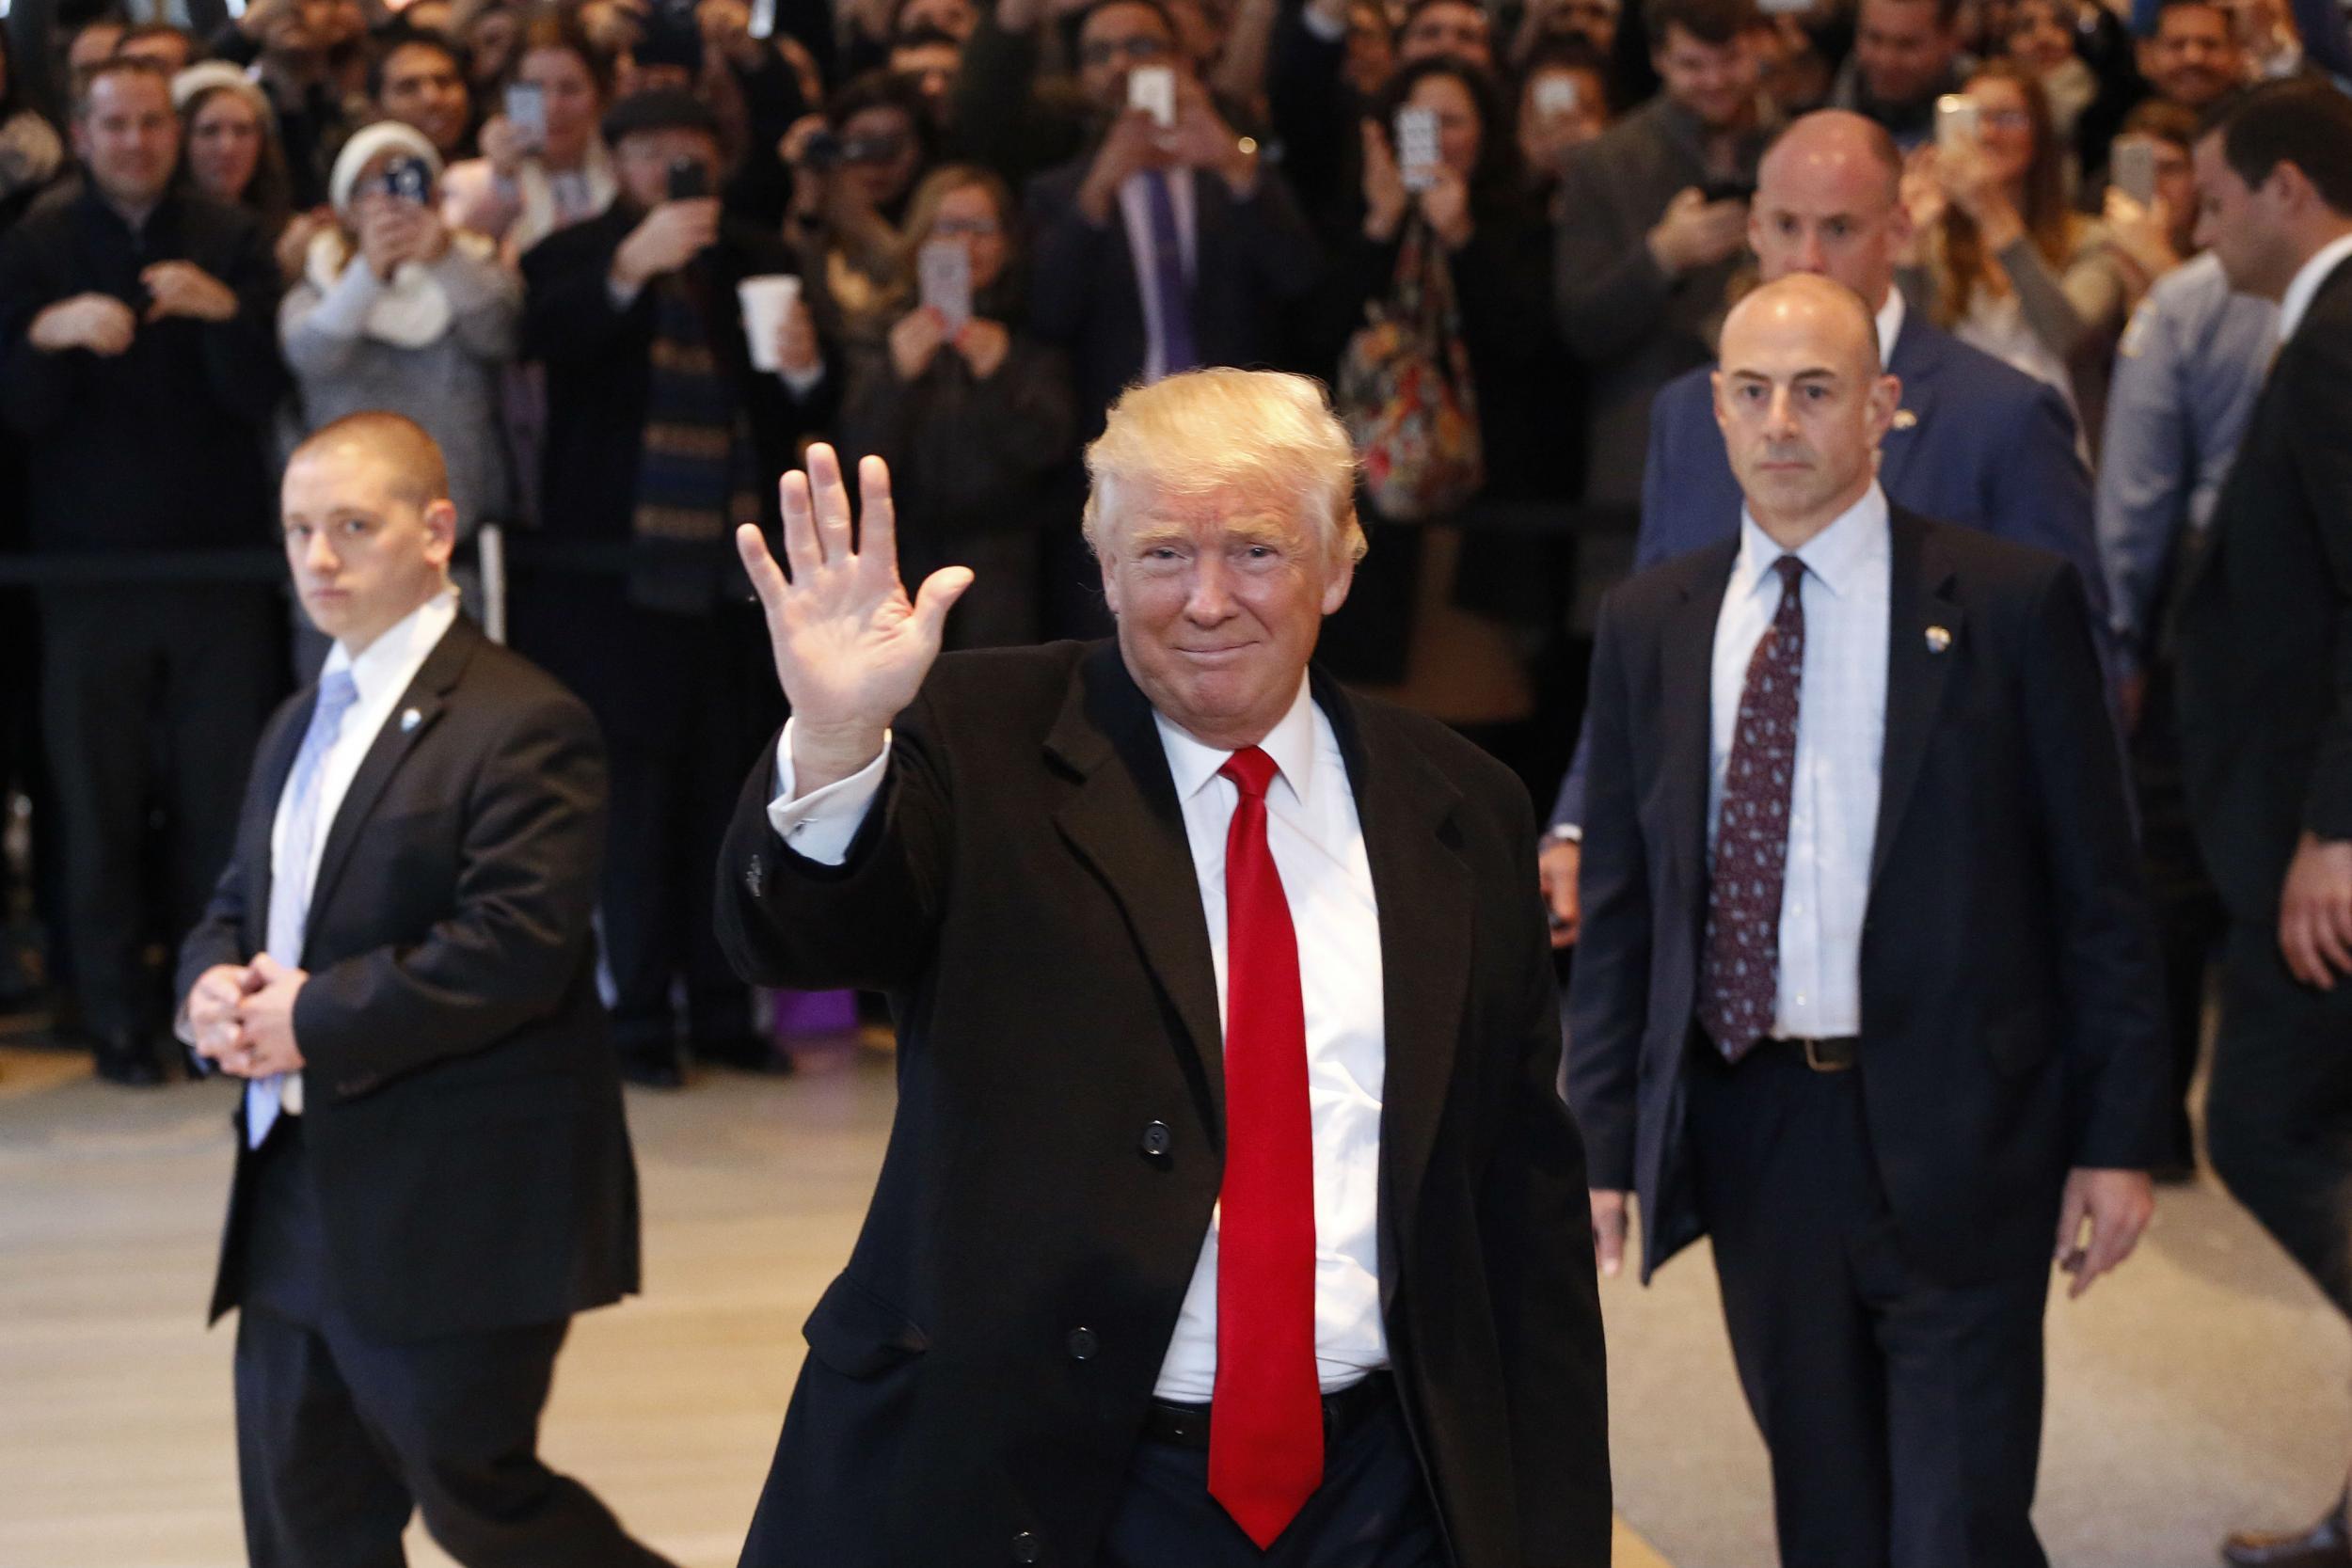 Donald Trump being booed on his way into a meeting with the New York Times in November 2016